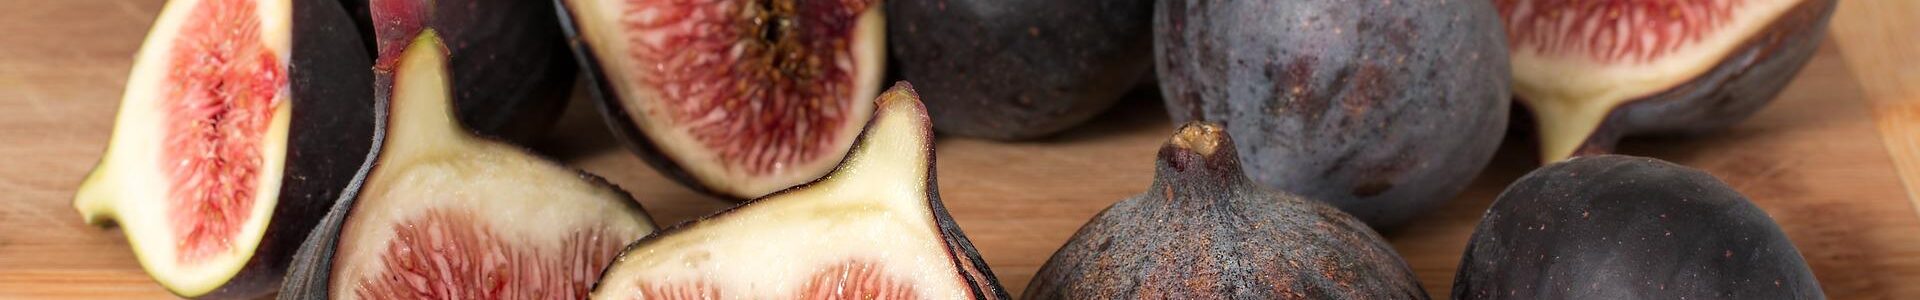 A Brief History of Figs